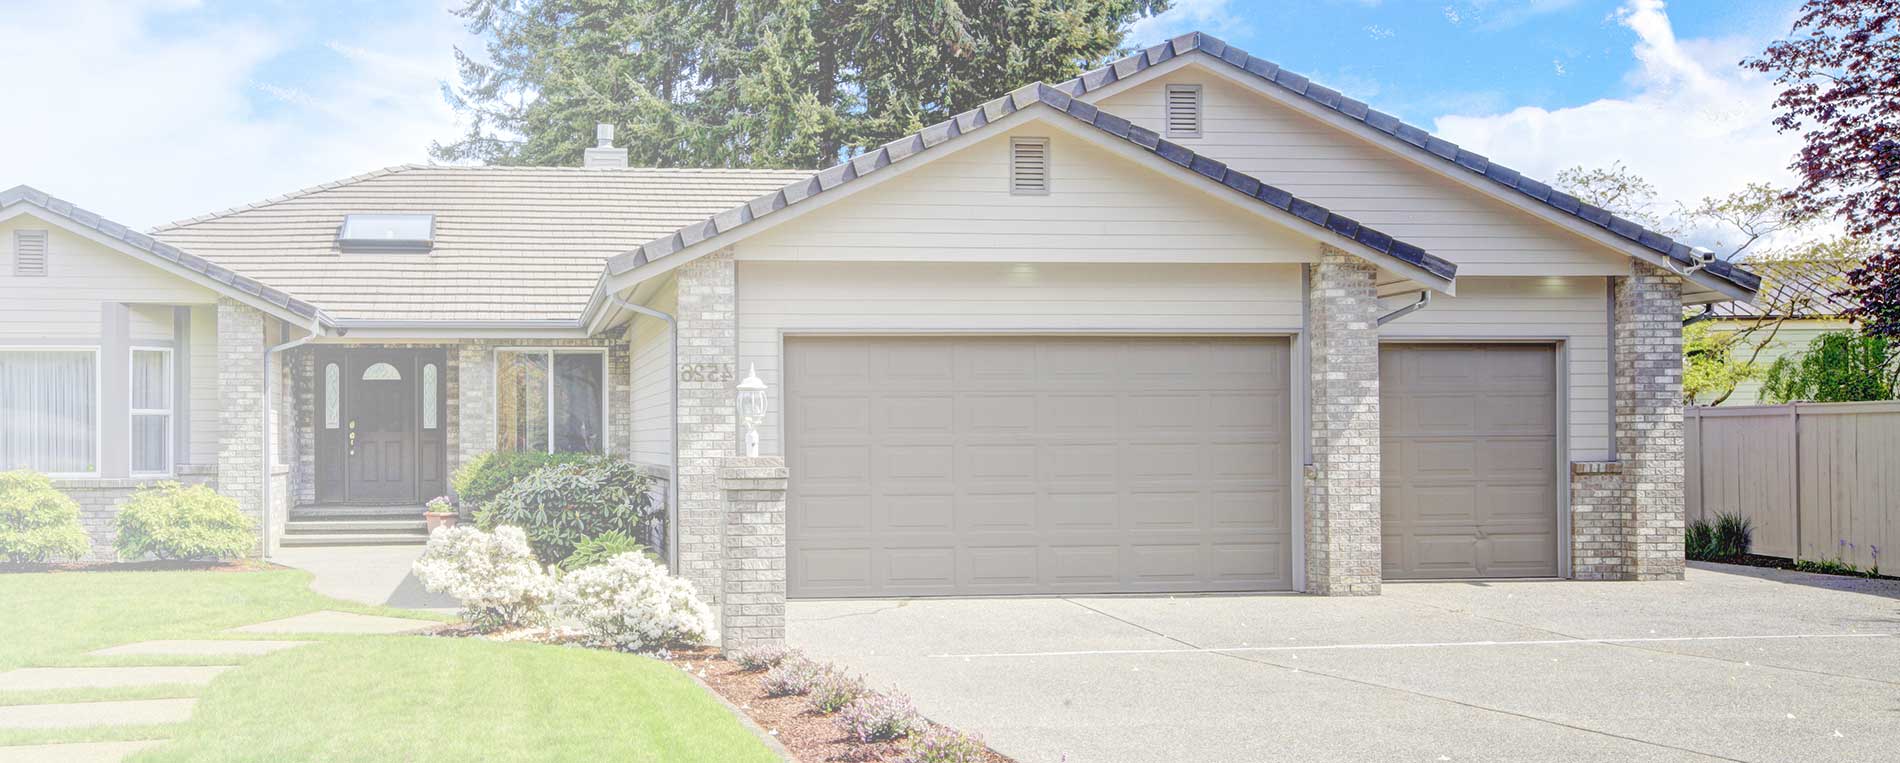 Things To Consider When Choosing a New Garage Door